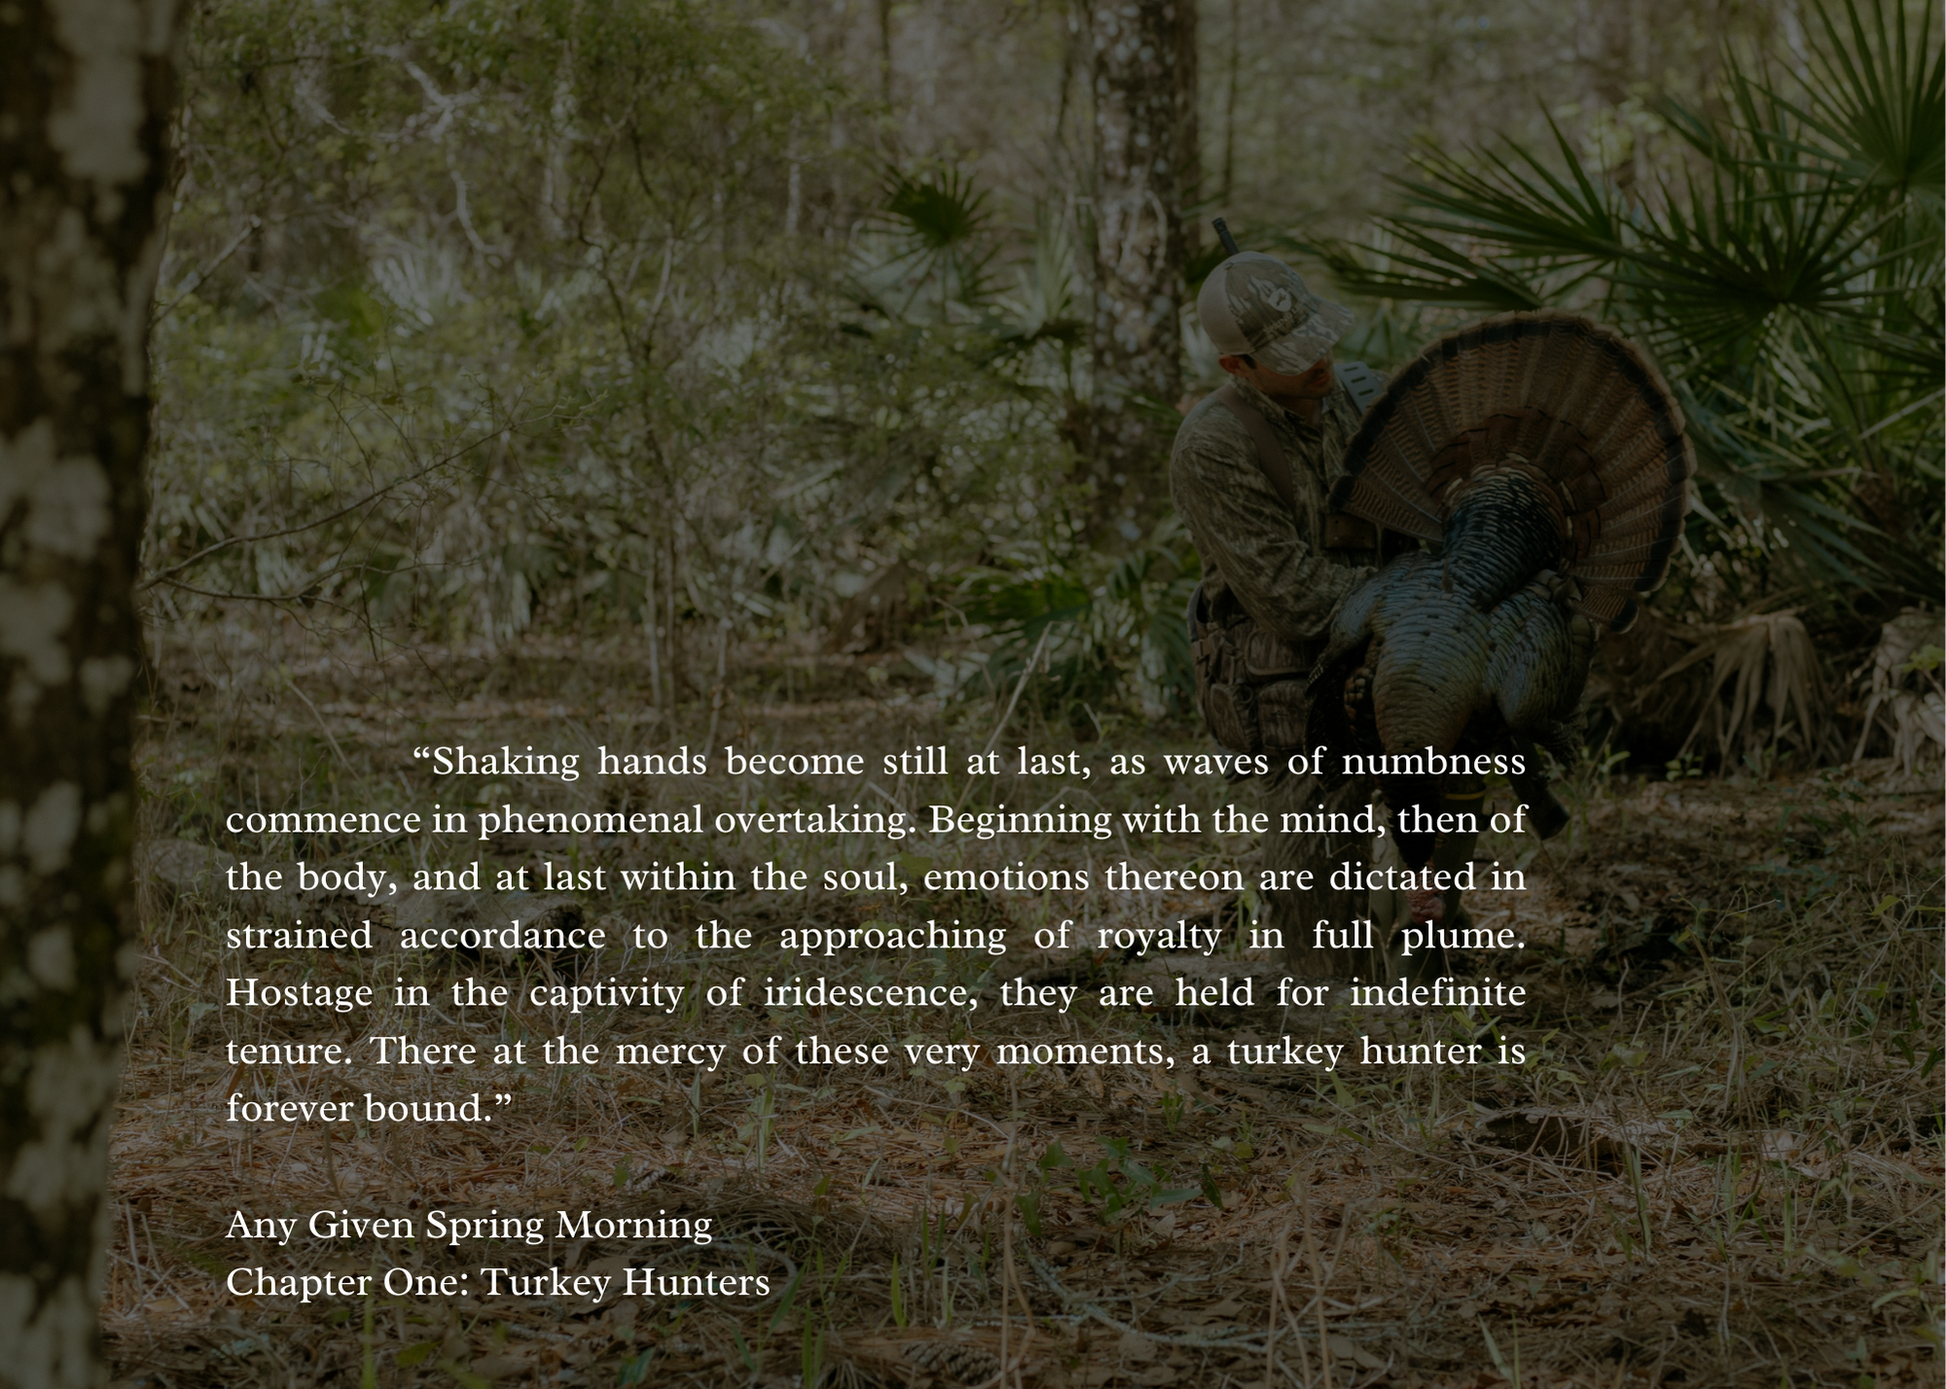 Any given spring morning, hunter farrior, spring legion, turkey hunting, tom kelly, ballad, mossy oak, nwtf, pinhoti, how to, stories, book, quote